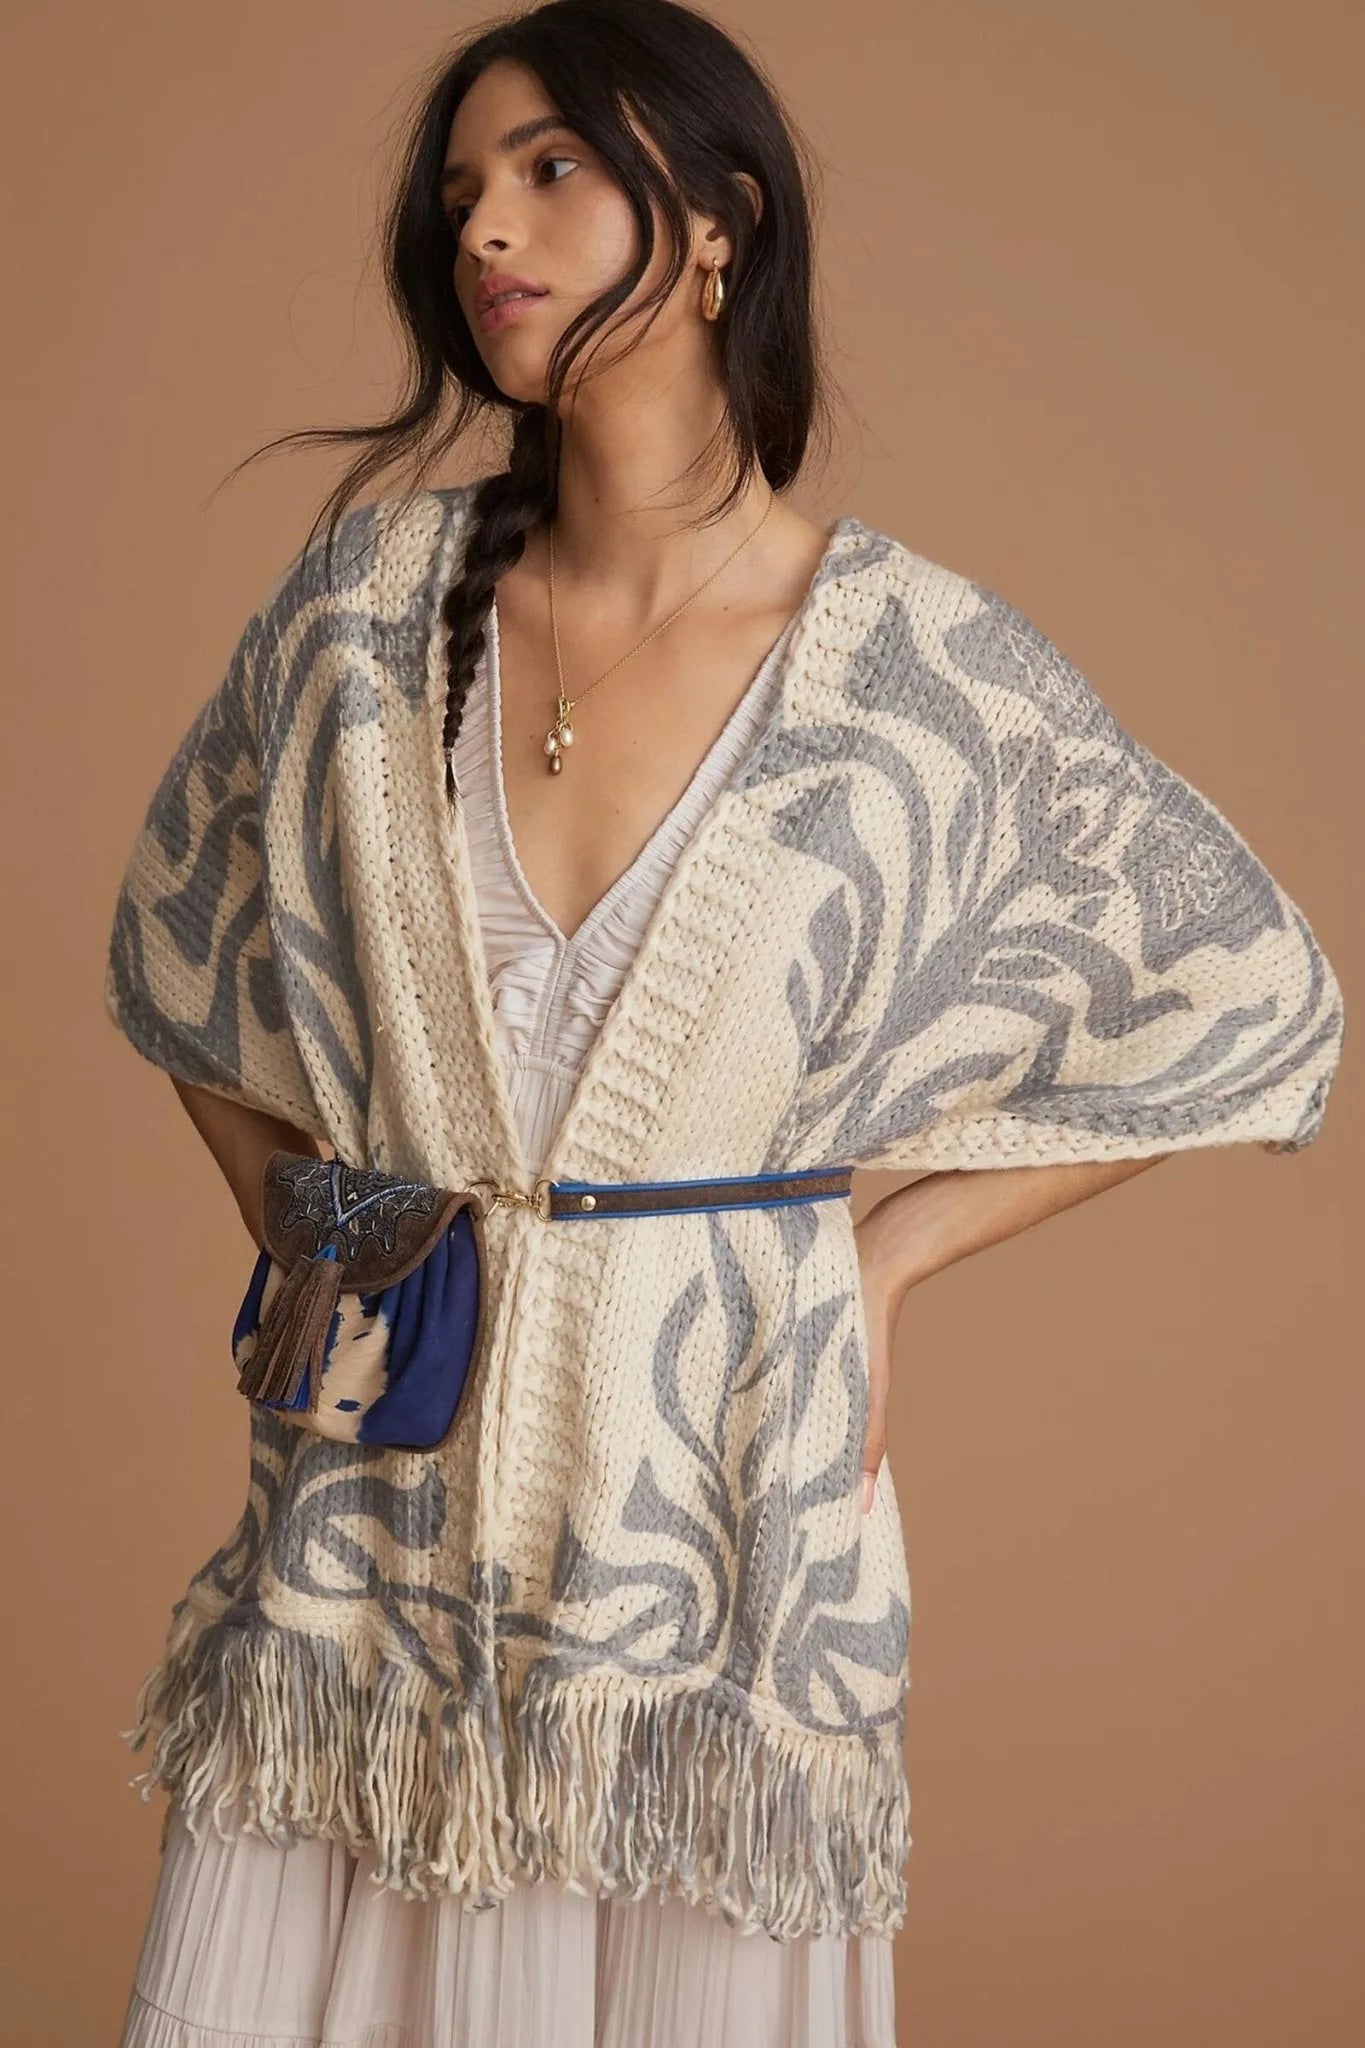 What does everyone think of the Kimono?, Page 3